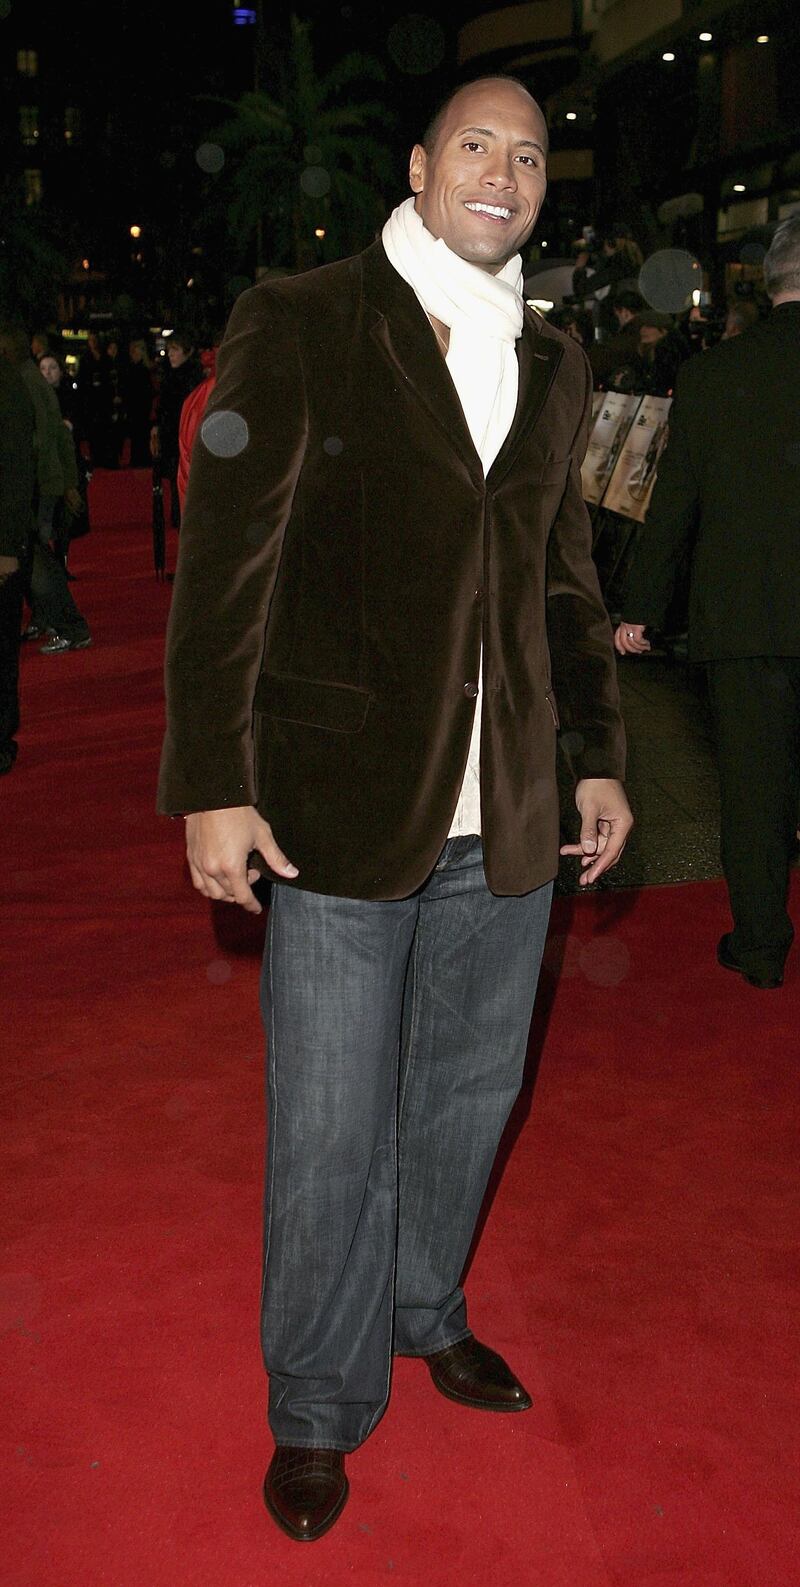 LONDON -  MARCH 7: Dwayne "The Rock" Johnson arrives at the UK Premiere of "Be Cool" at the Empire Leicester Square on March 7, 2005 in London. The film is the follow-up to "Get Shorty" and is based on the Elmore Leonard books.  (Photo by MJ Kim/Getty Images)